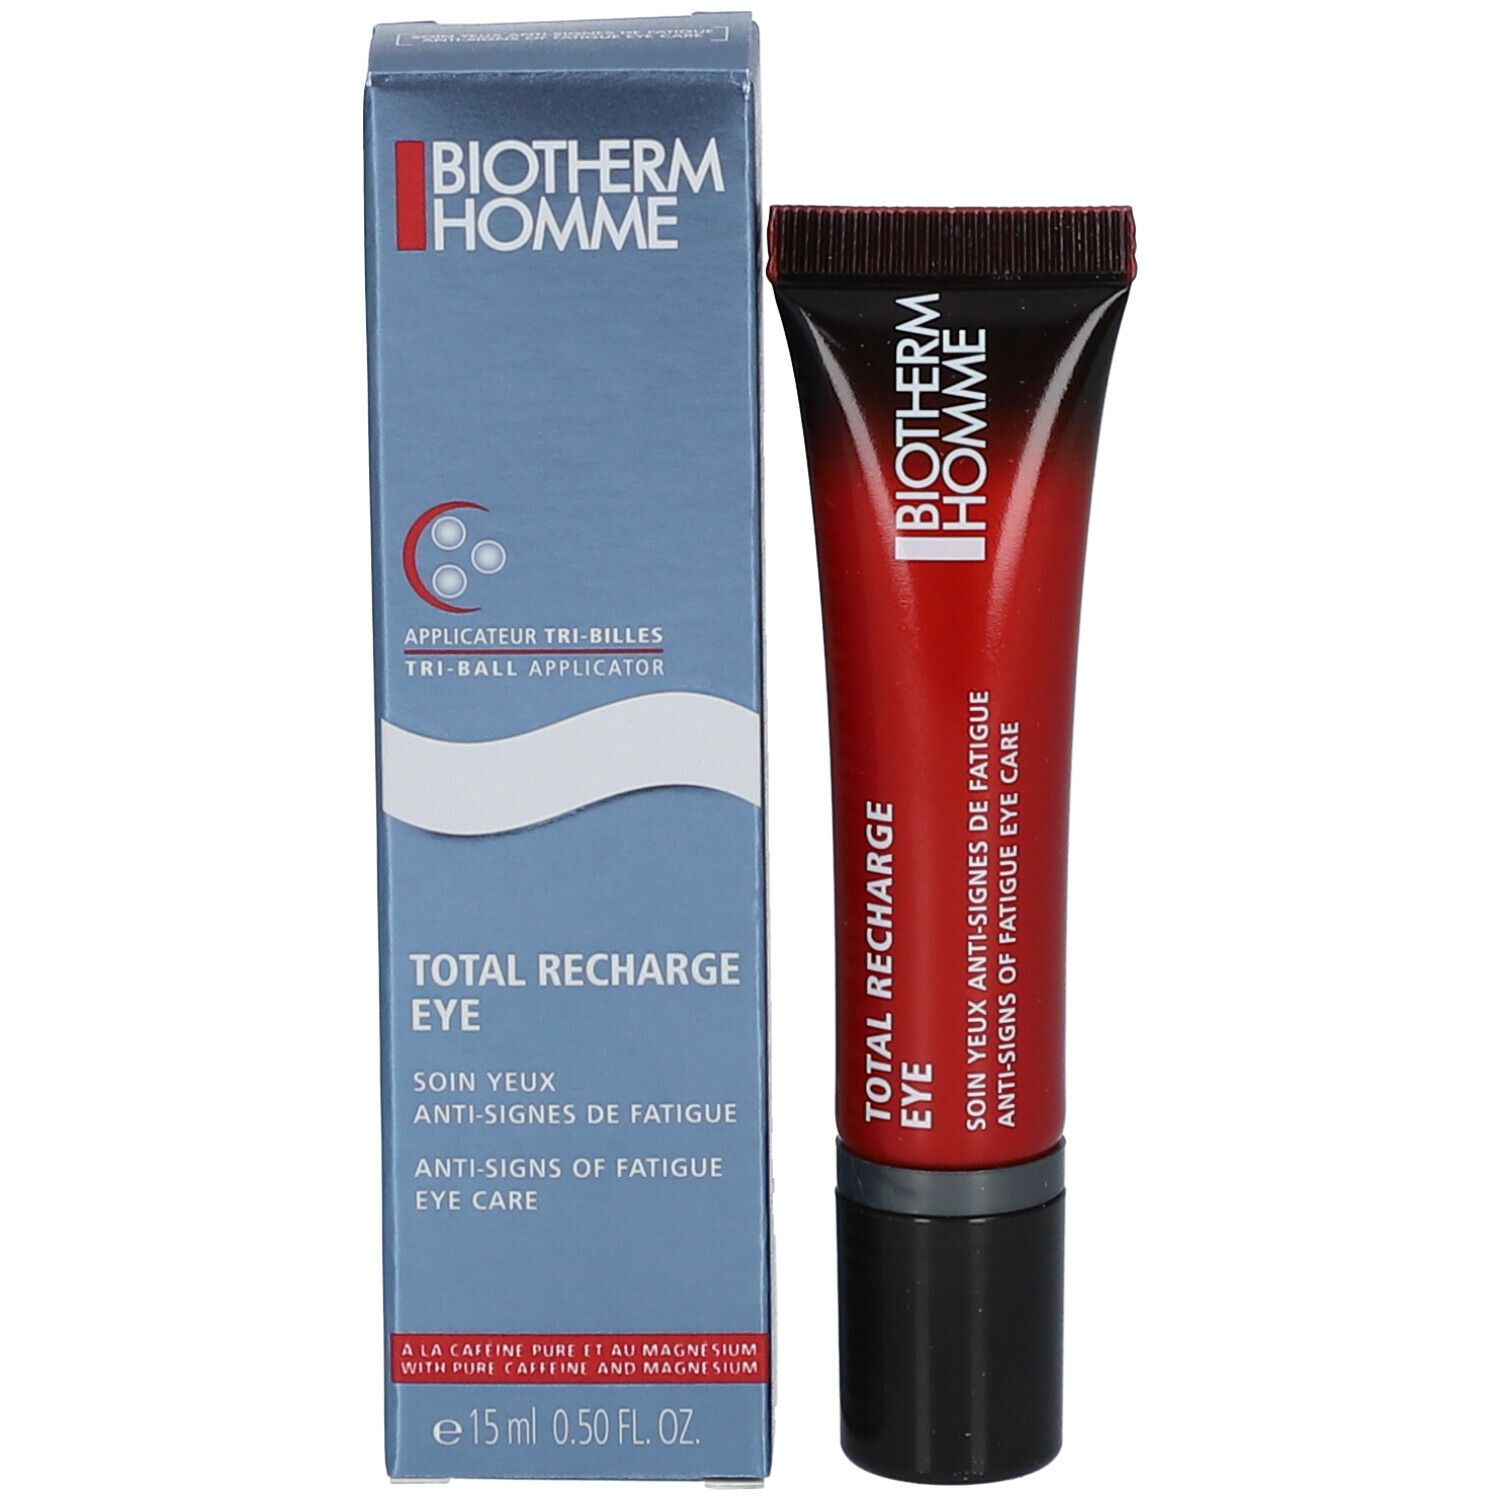 Biotherm HOMME Total Recharge Eye